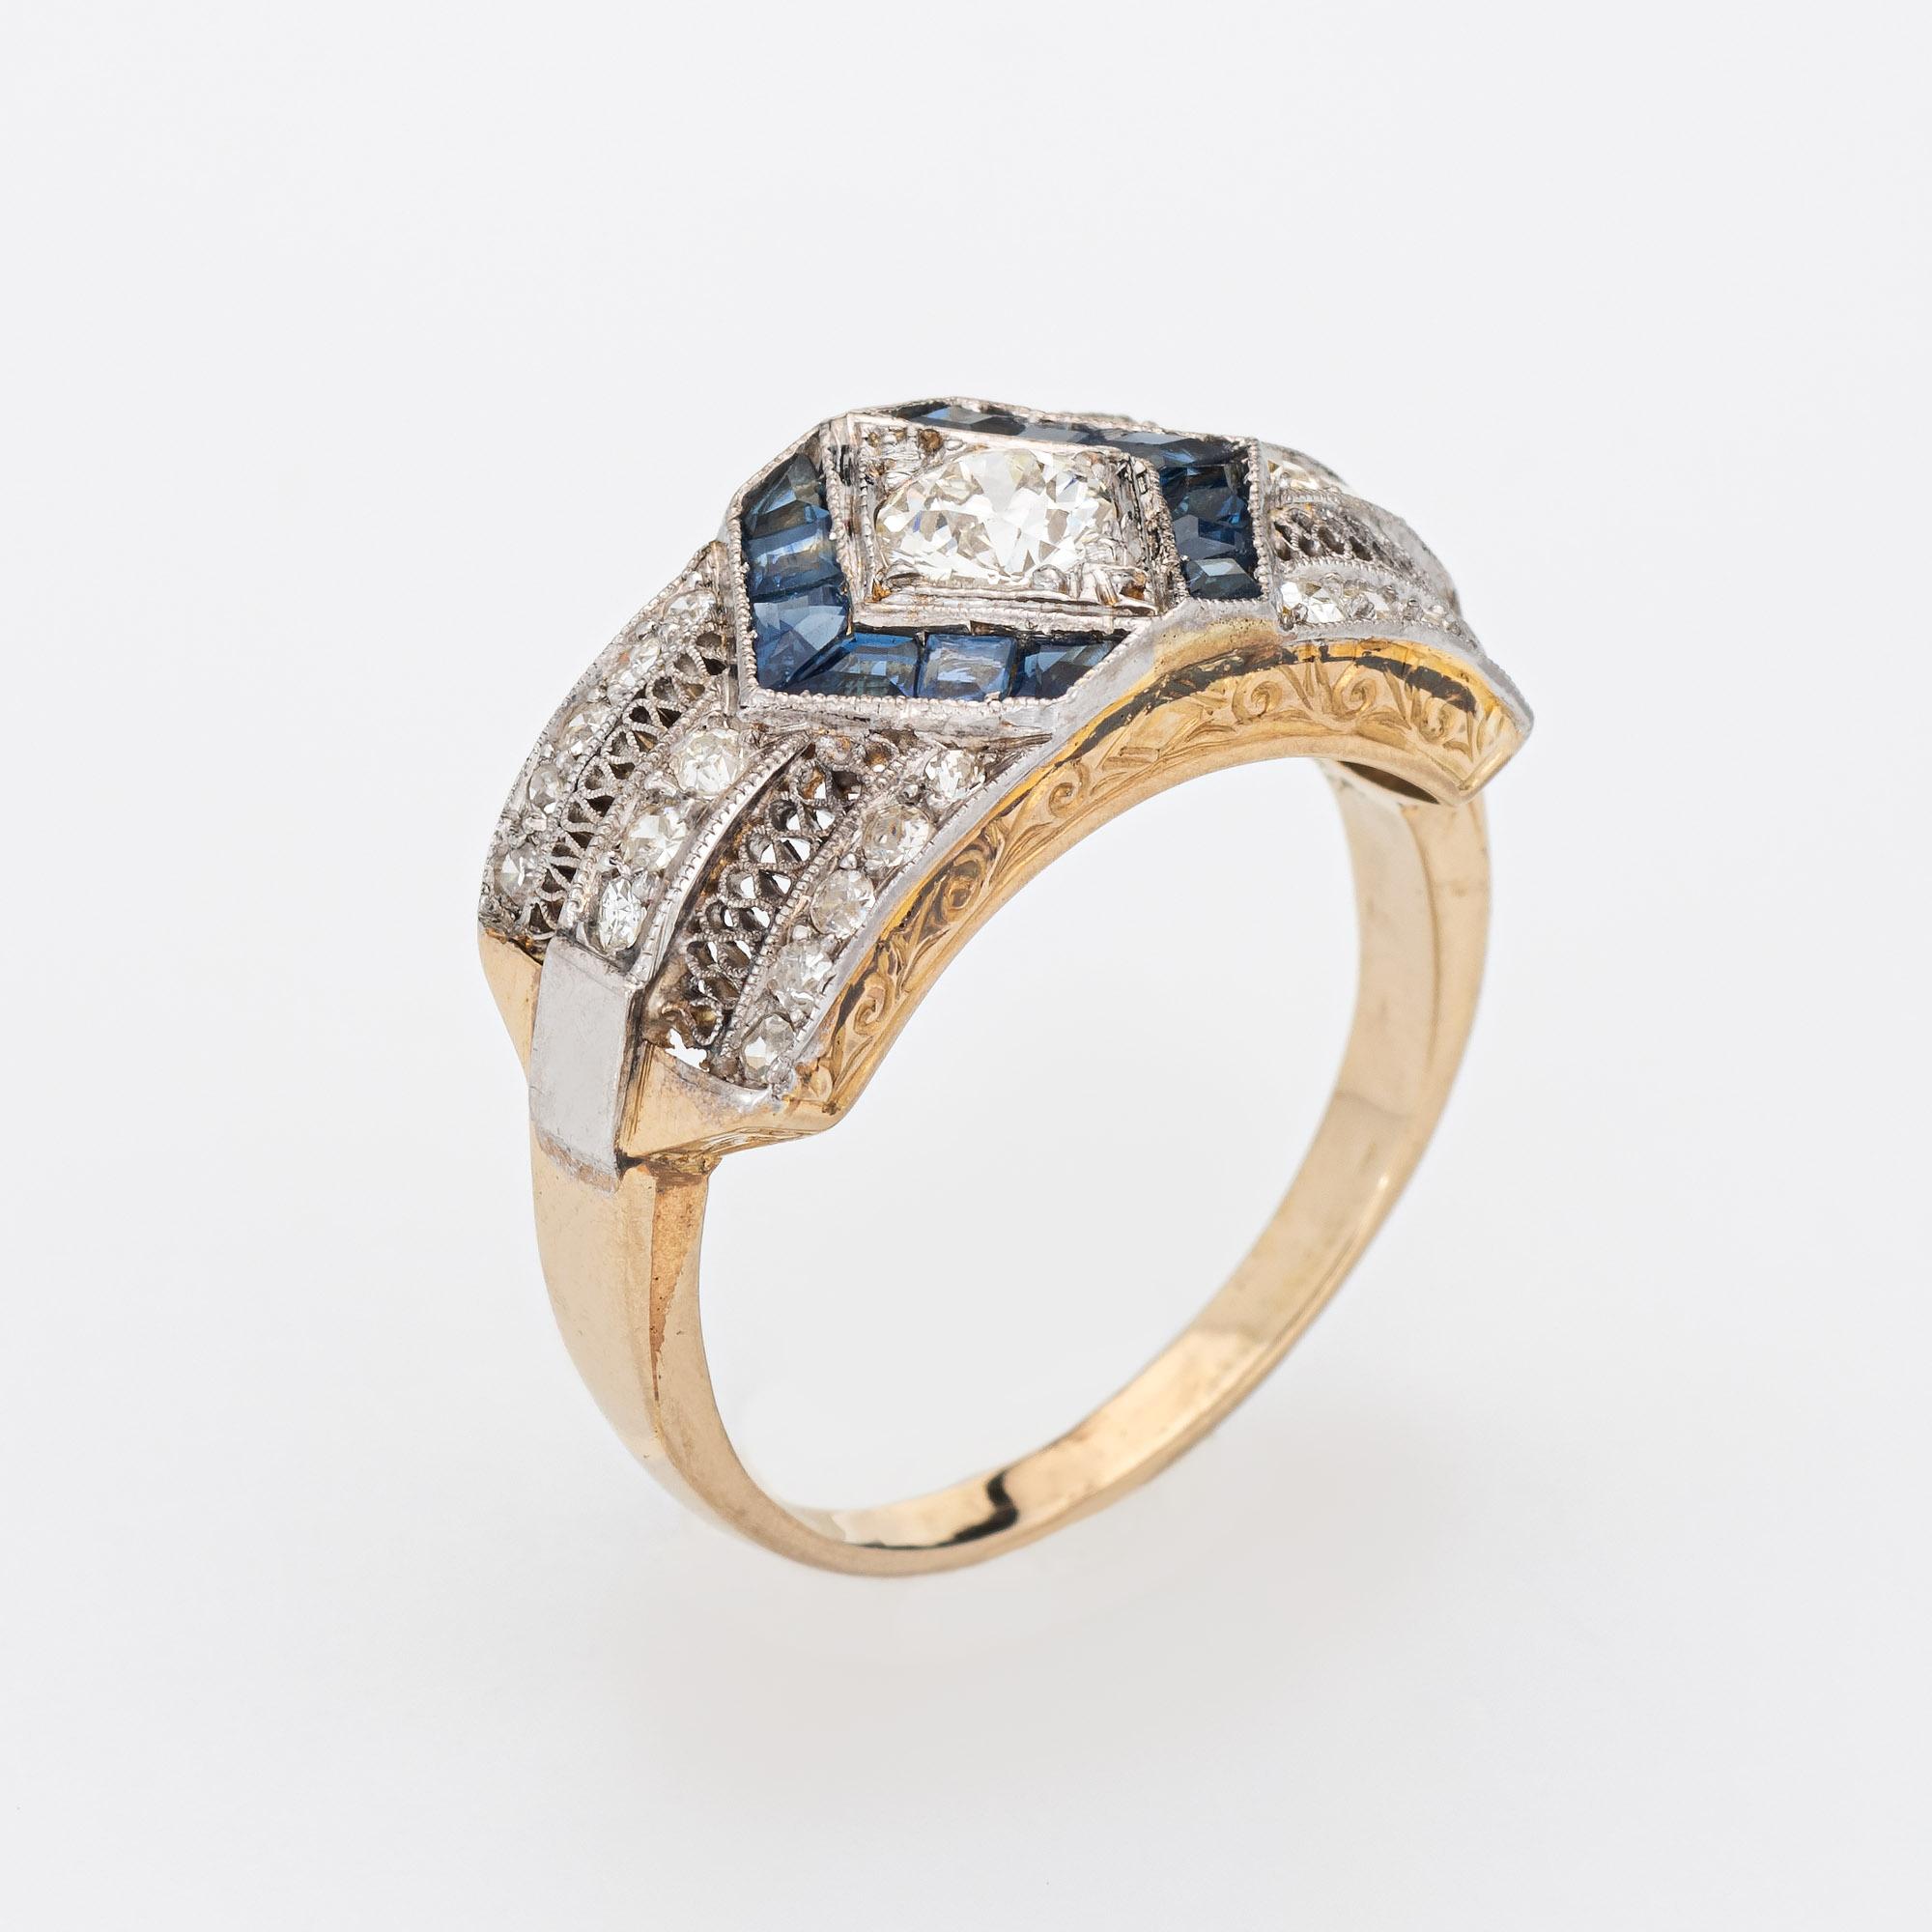 Finely detailed vintage Art Deco diamond & sapphire ring (circa 1920s to 1930s) crafted in 18k yellow gold & platinum. 

Center set old European cut diamond is estimated at 0.40 carats, accented with an estimated 0.28 carats of single cut diamonds.